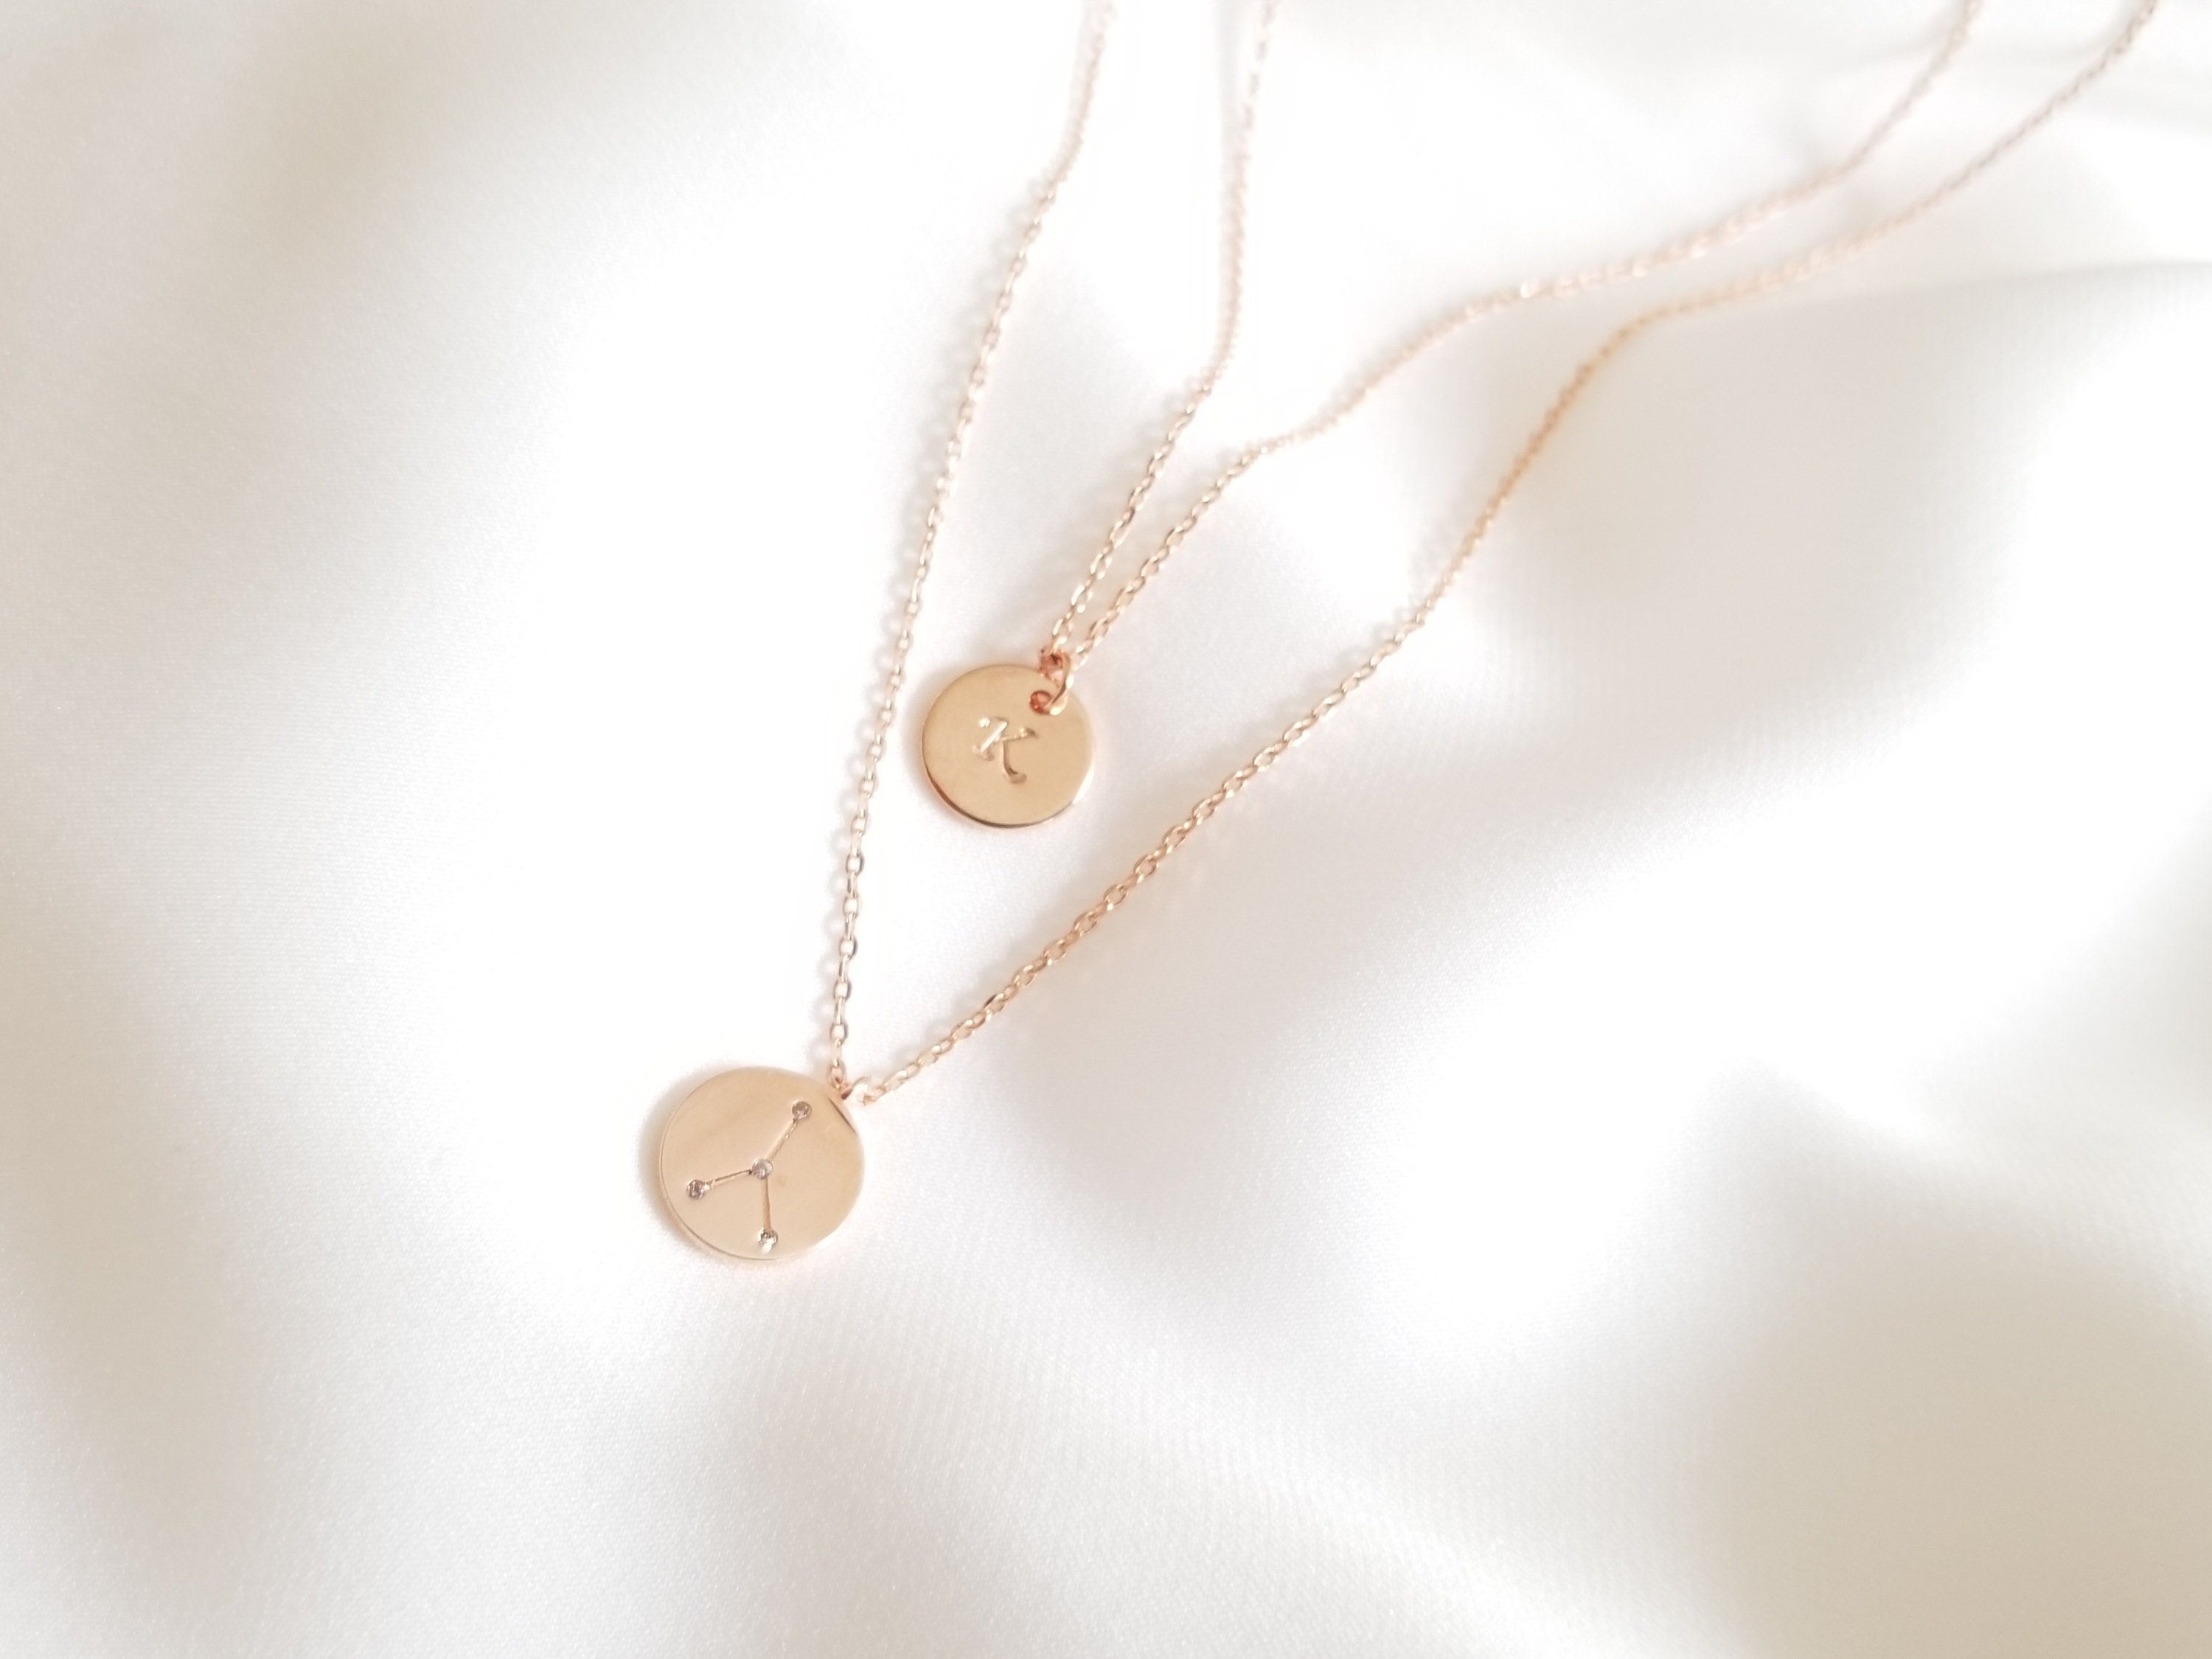 Cancer & Initial Necklaces/Layered Necklaces Set Of 2 Zodiac Constellation Necklace Celestial Jewelry, Star Sign, Birthday Gifts